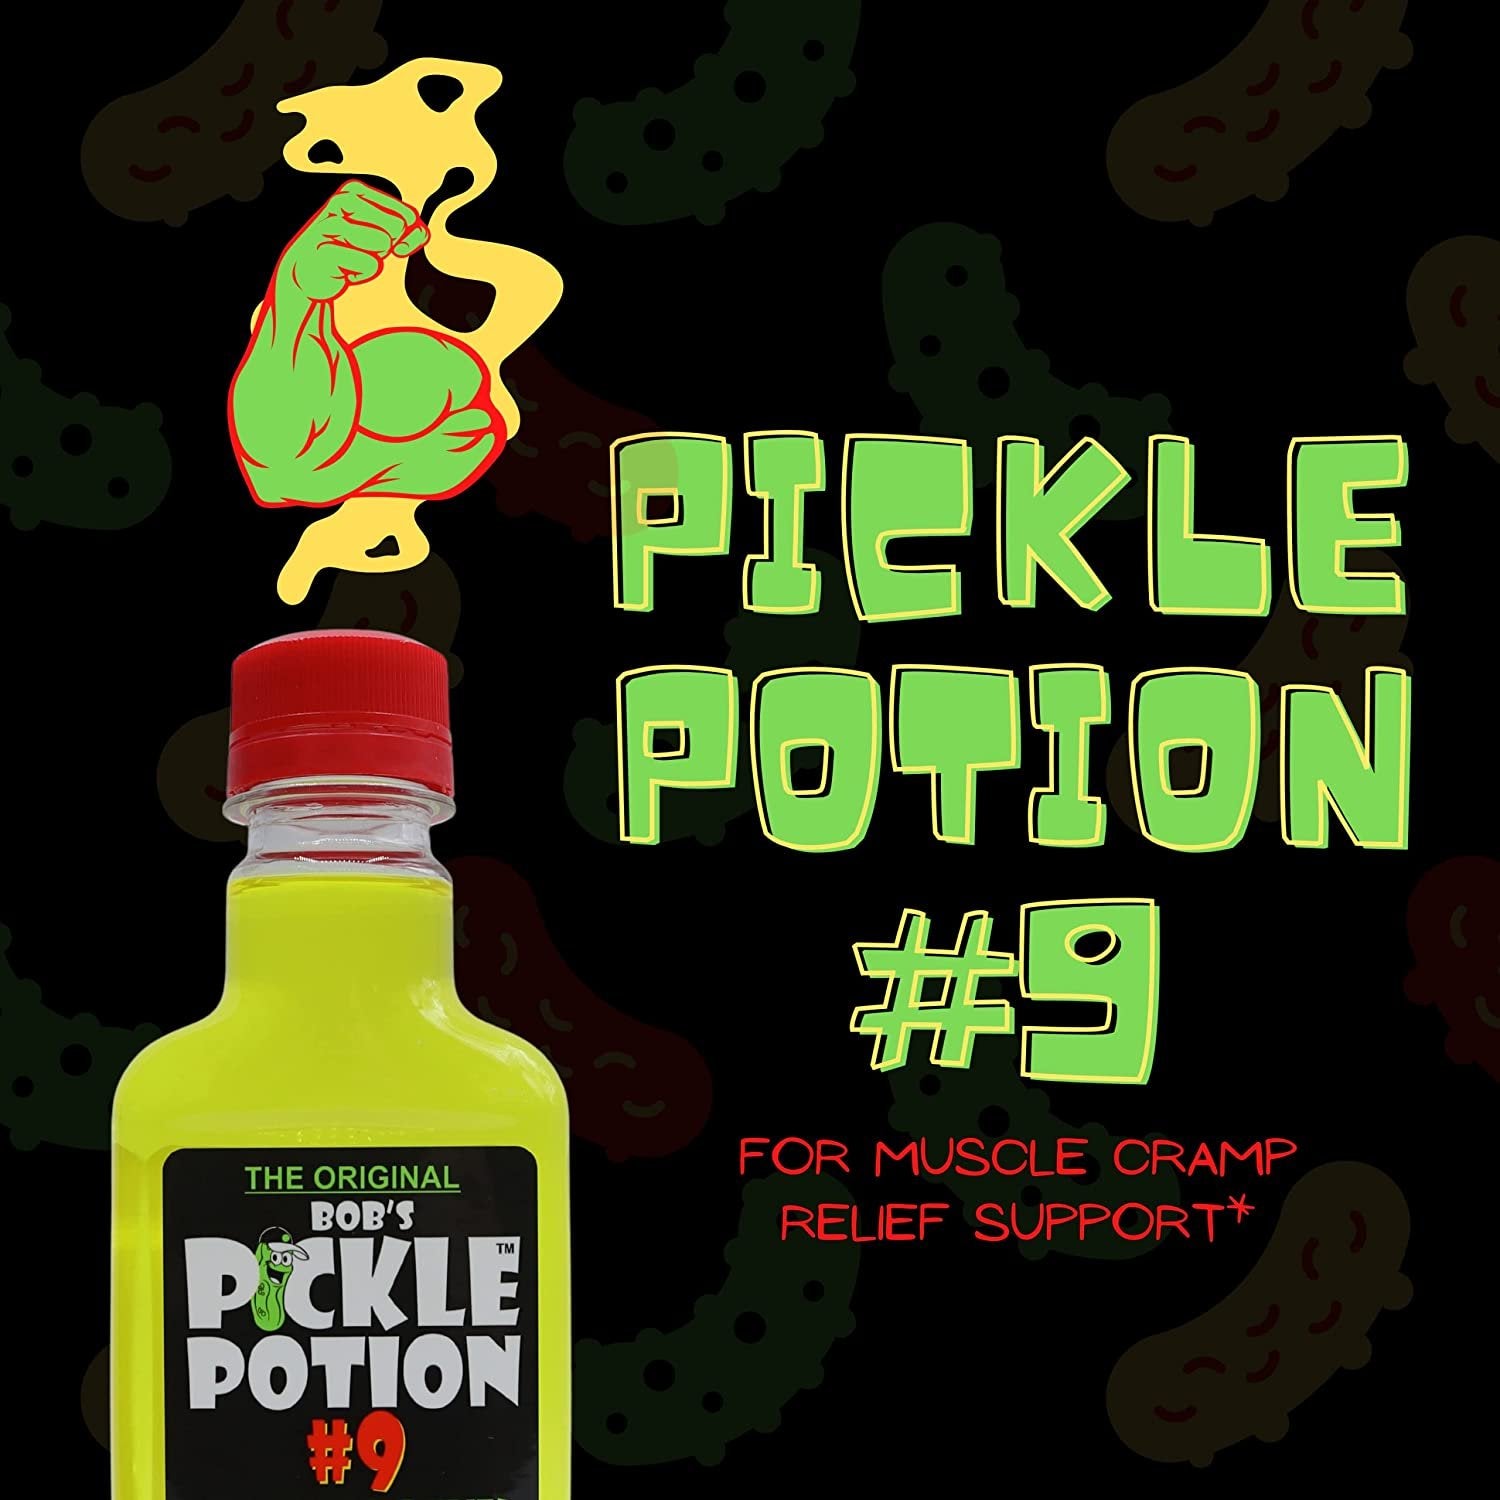 Bob's Pickle Potion 9 Sports Drinks - Electrolyte Drink for Pre Workout or Post Workout - Prime Hydration Drink for Leg Cramp Relief - 6.3 Oz 187ml Individual Pickle Juice Bottle with Bonus Key Chain